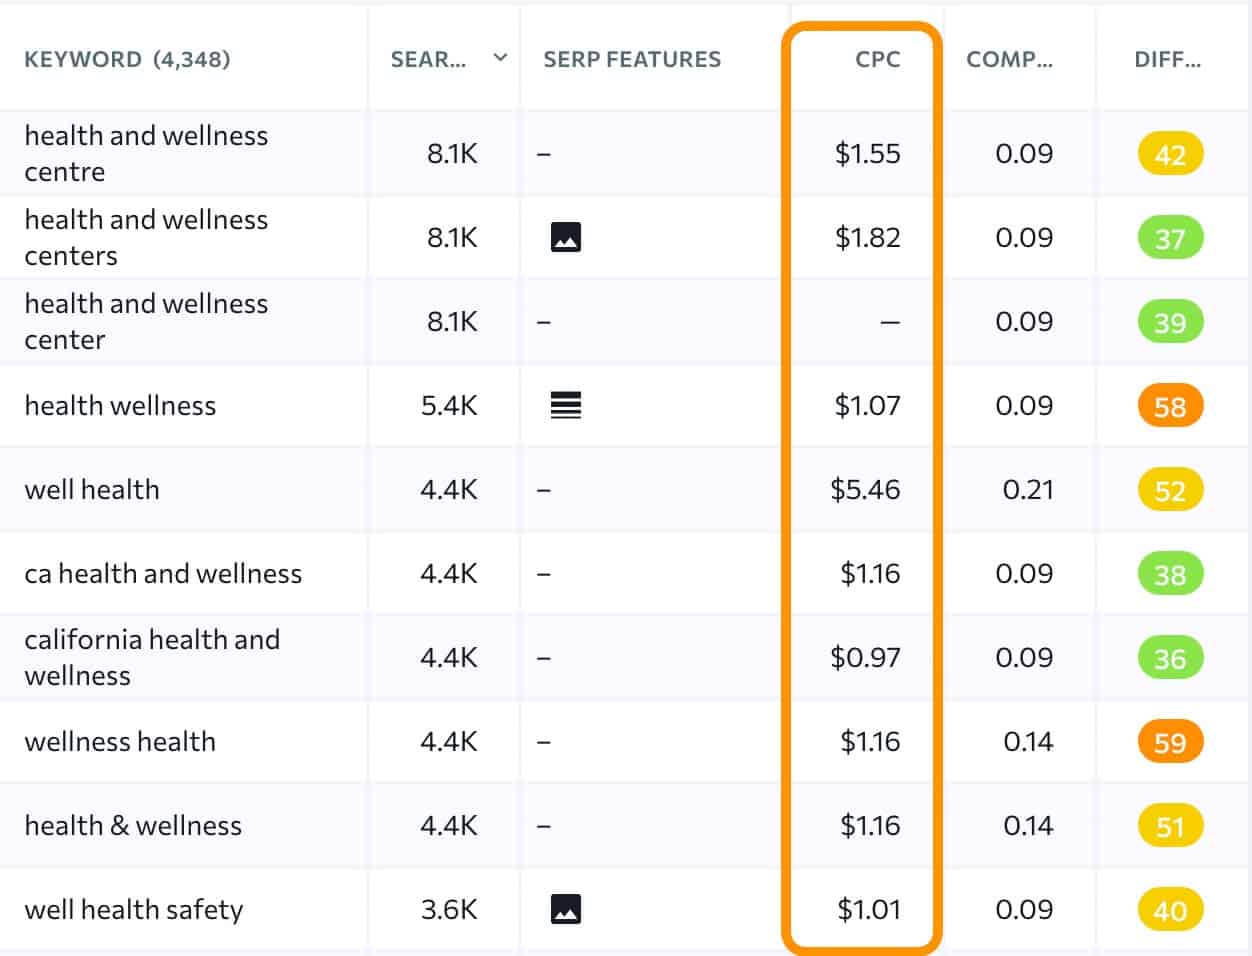 health and wellness highest paying keywords